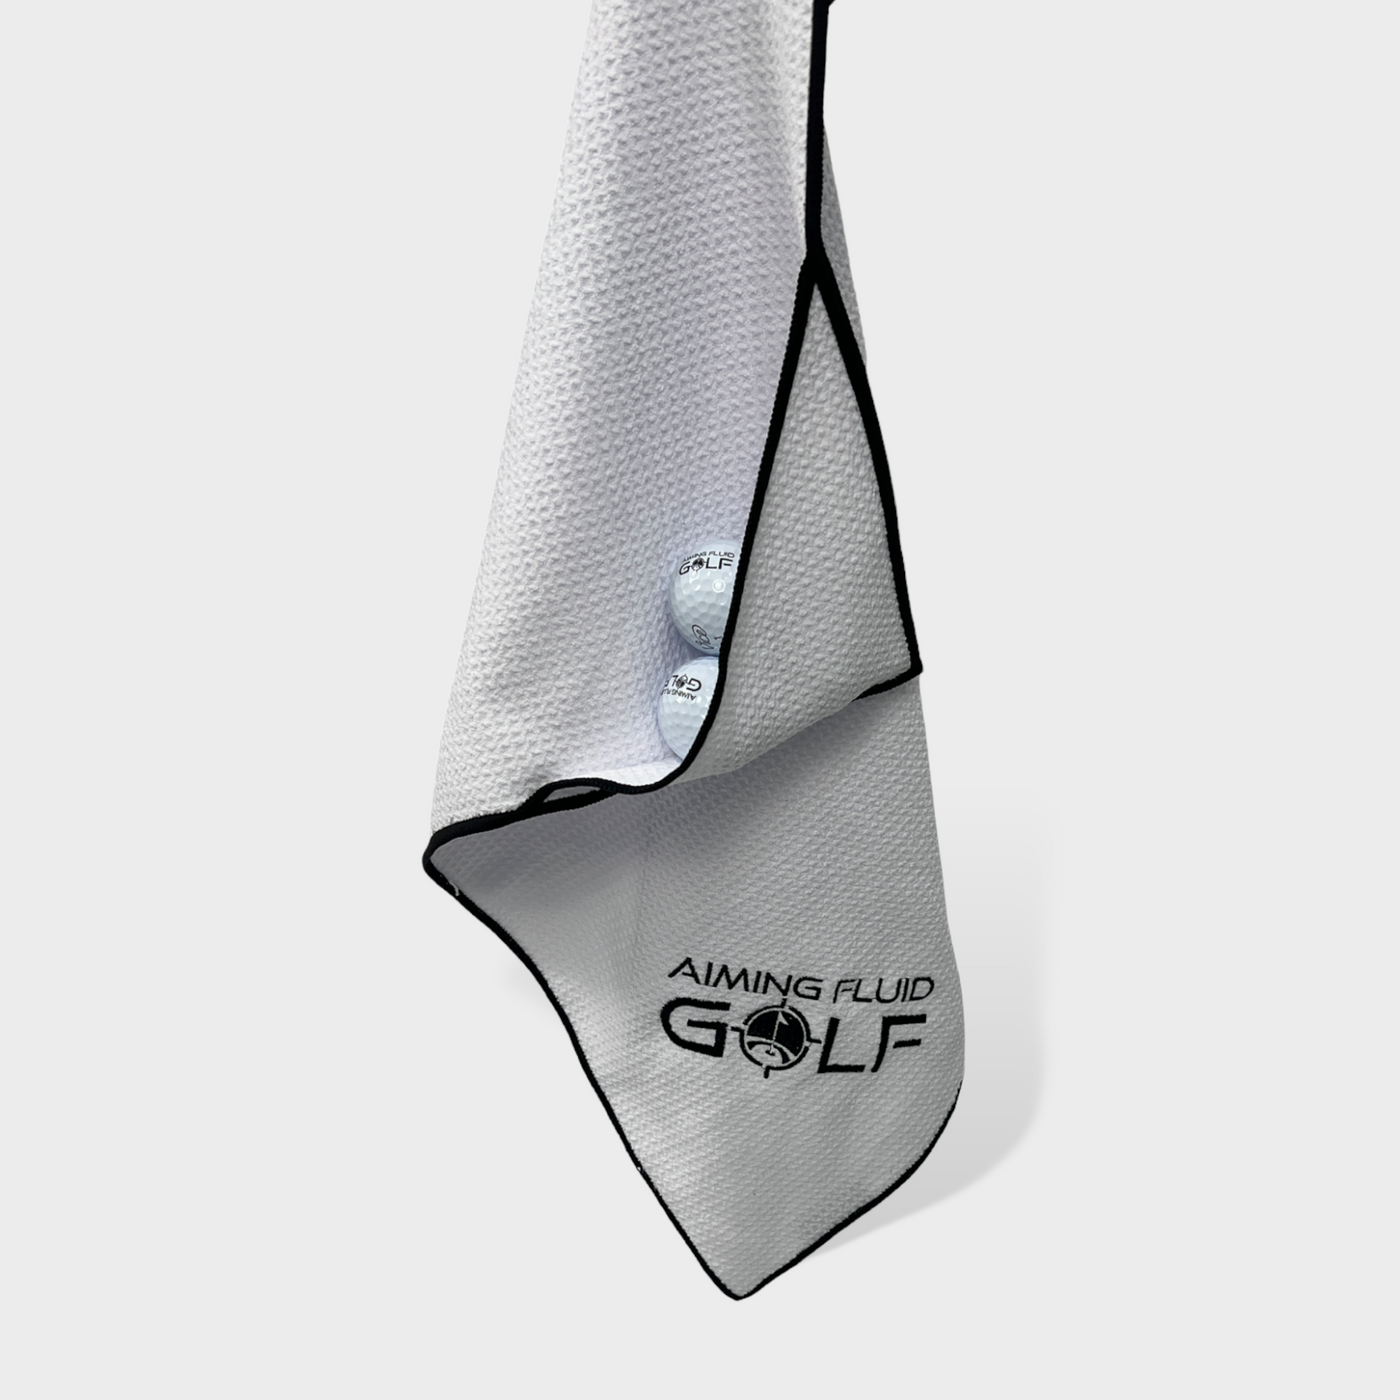 Aiming Fluid Golf (THE BEST TOWEL IN GOLF) Magnetic Towel Tall Boy (Large) in color gray